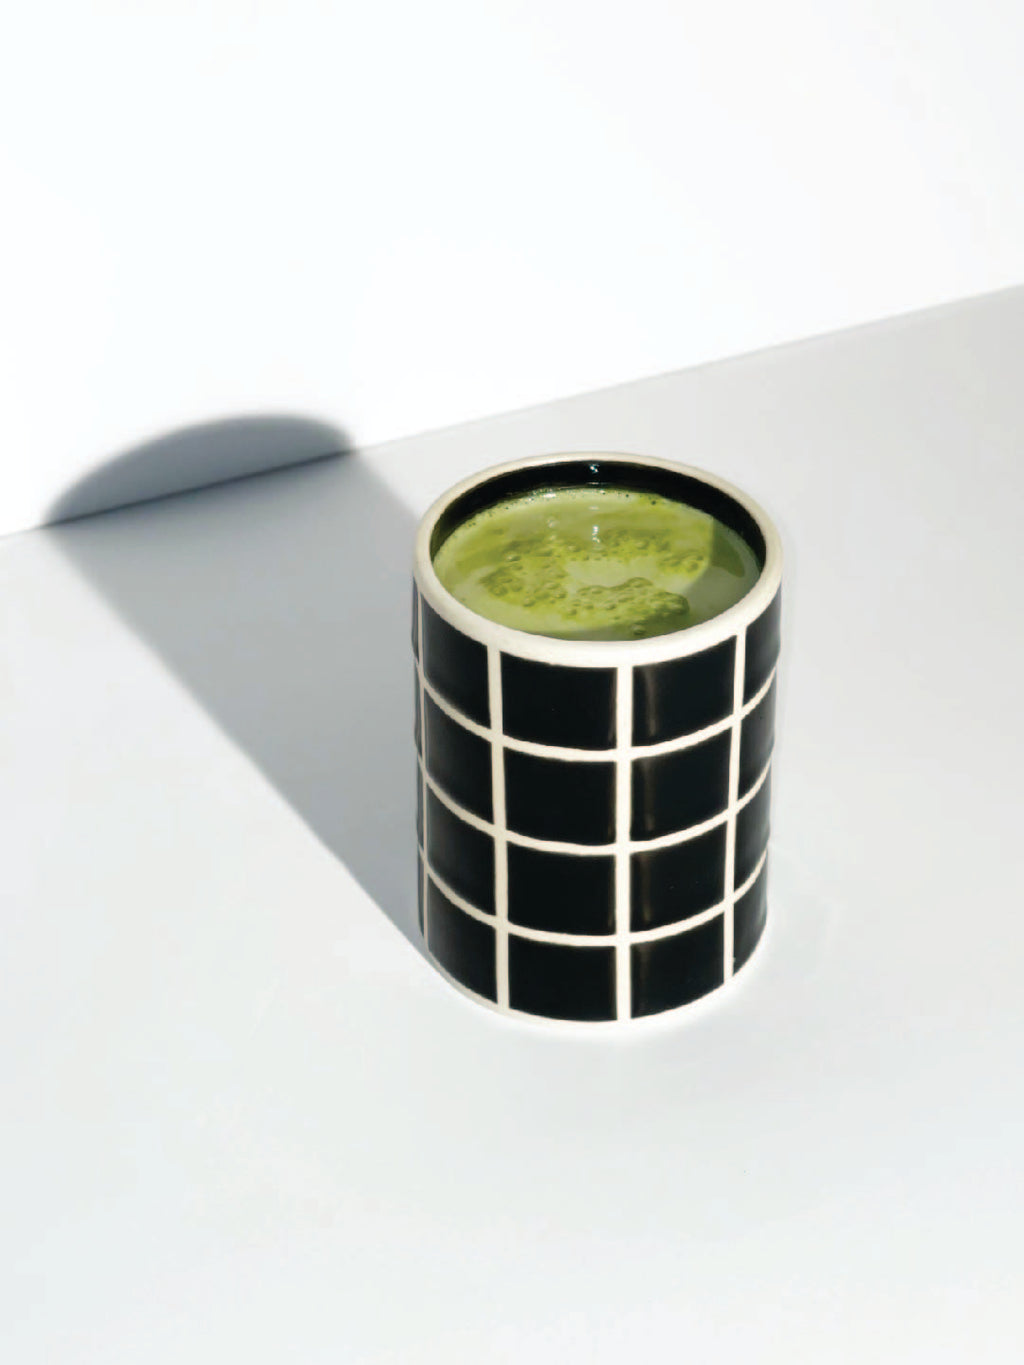 Carrelage Cup by NonPorous Ceramics